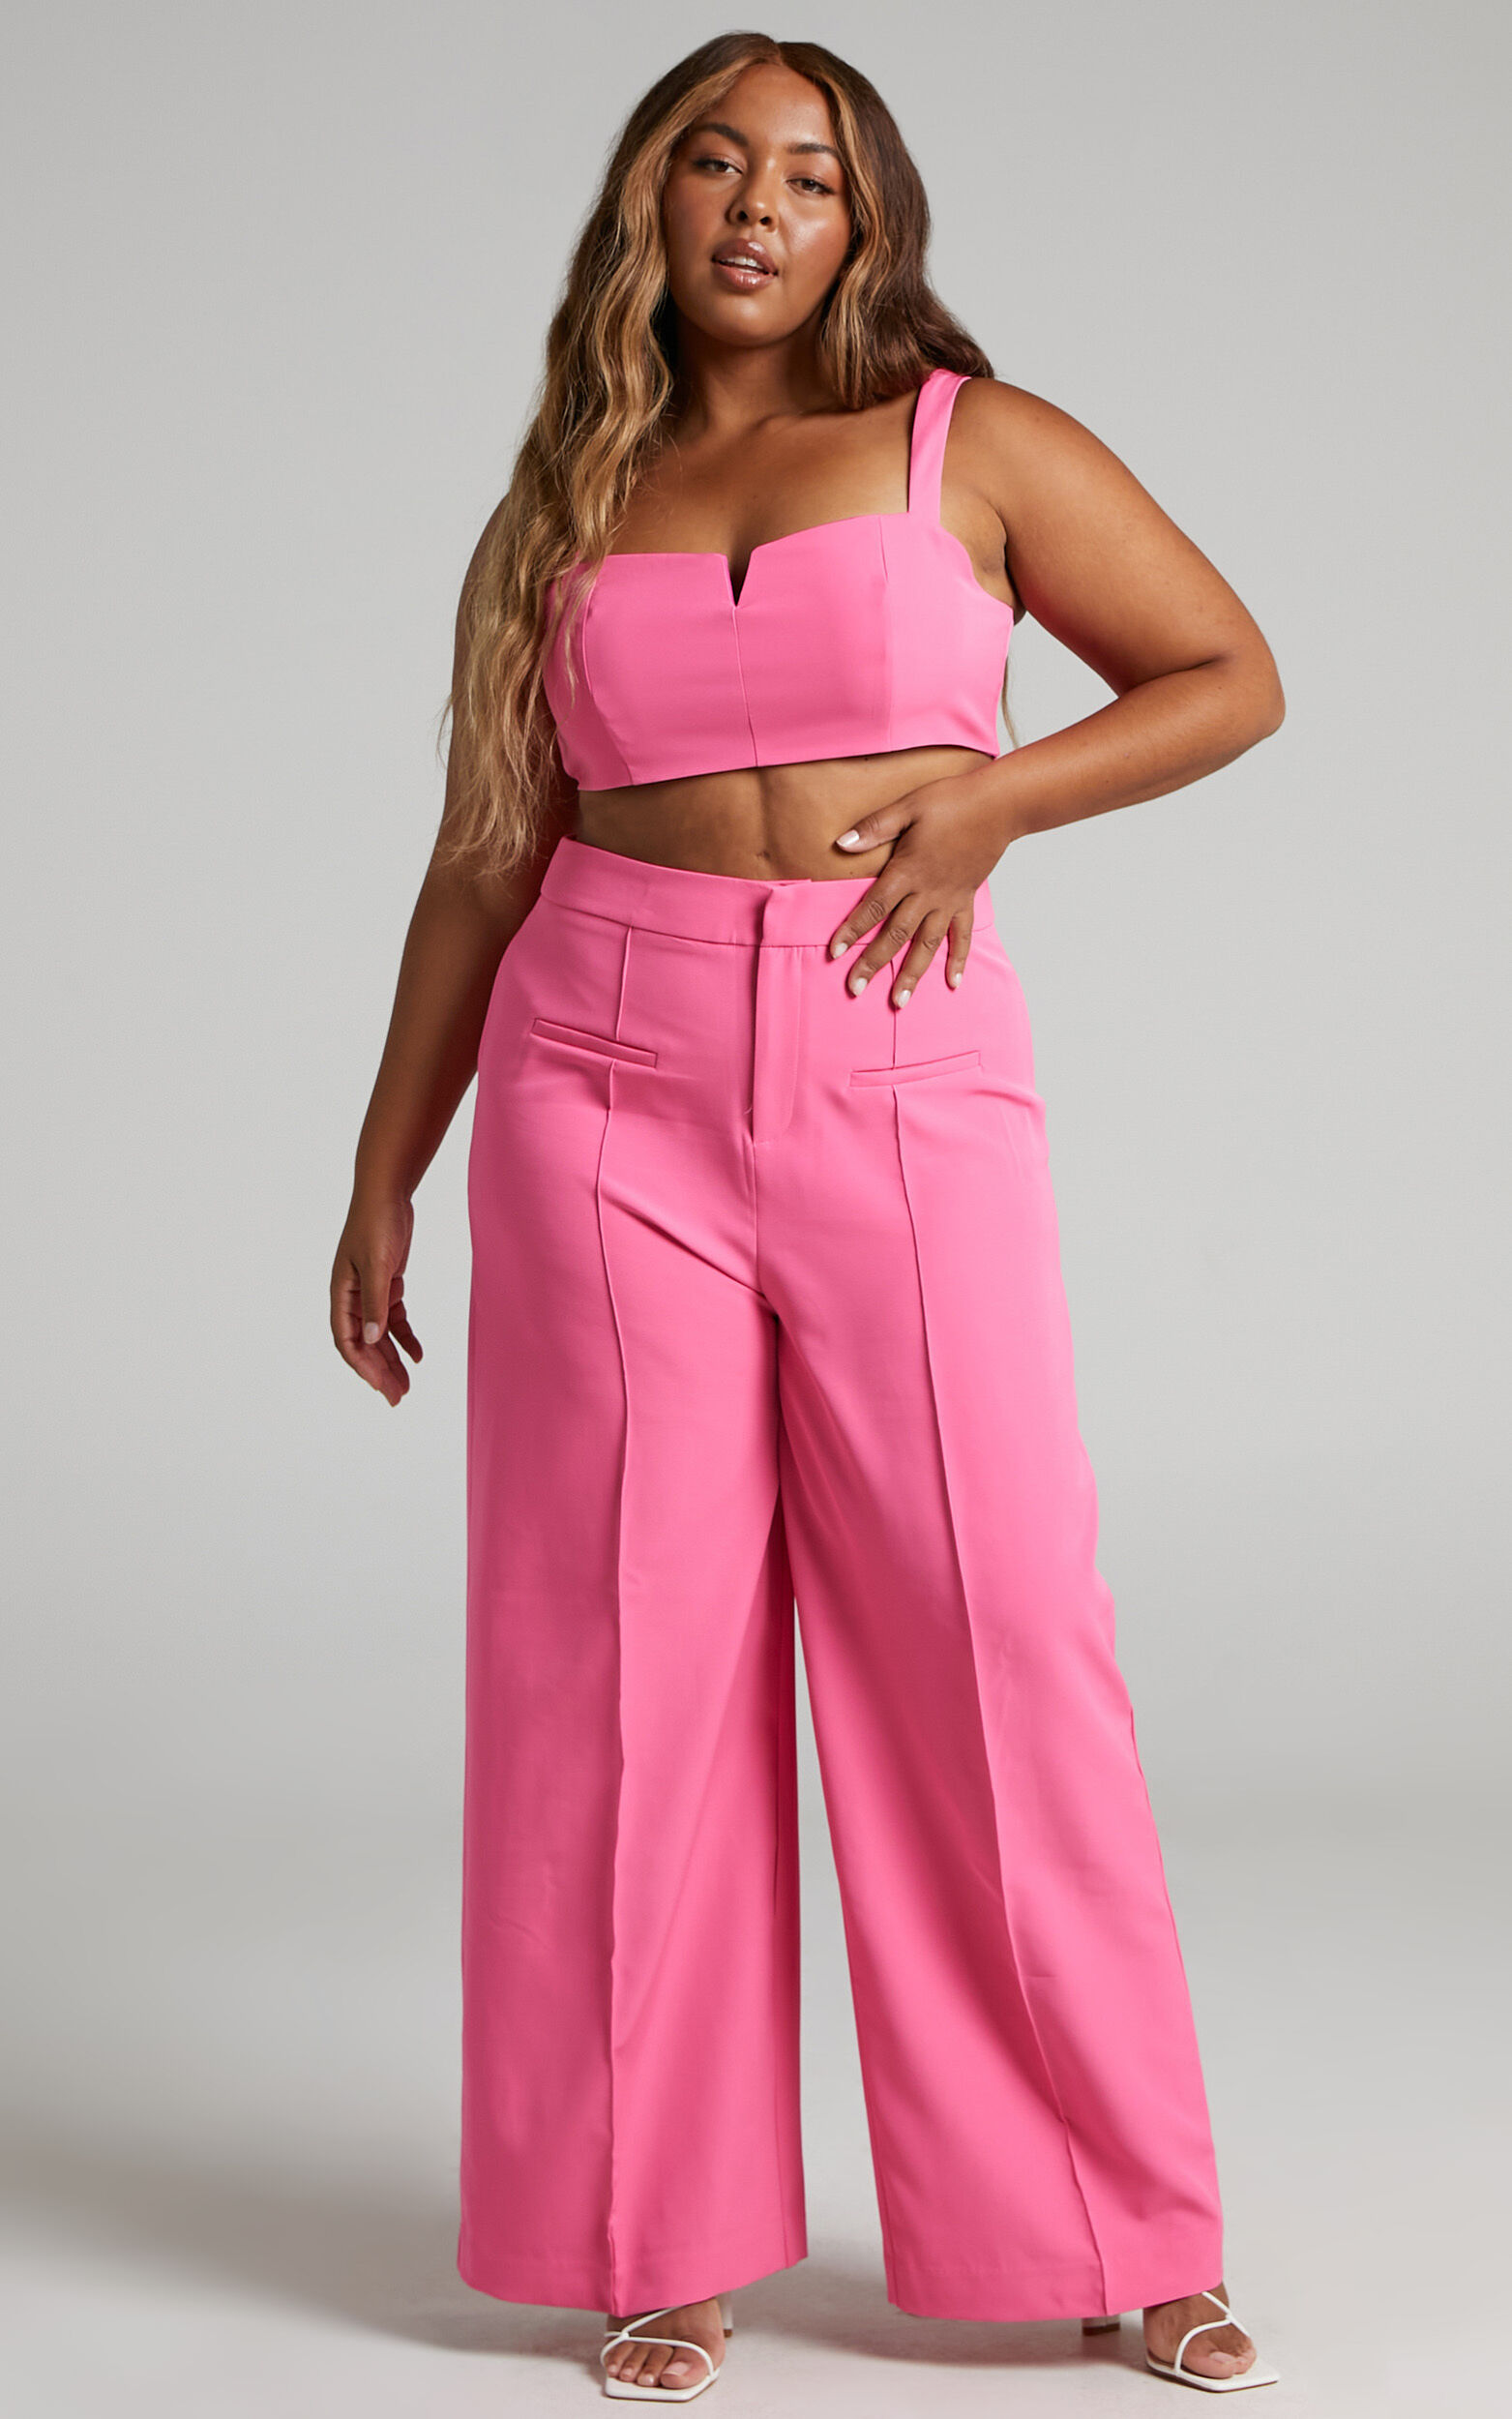 Sequin Two Piece Sets, Co Ord Sets, 2 Piece Outfits - Hello Molly US